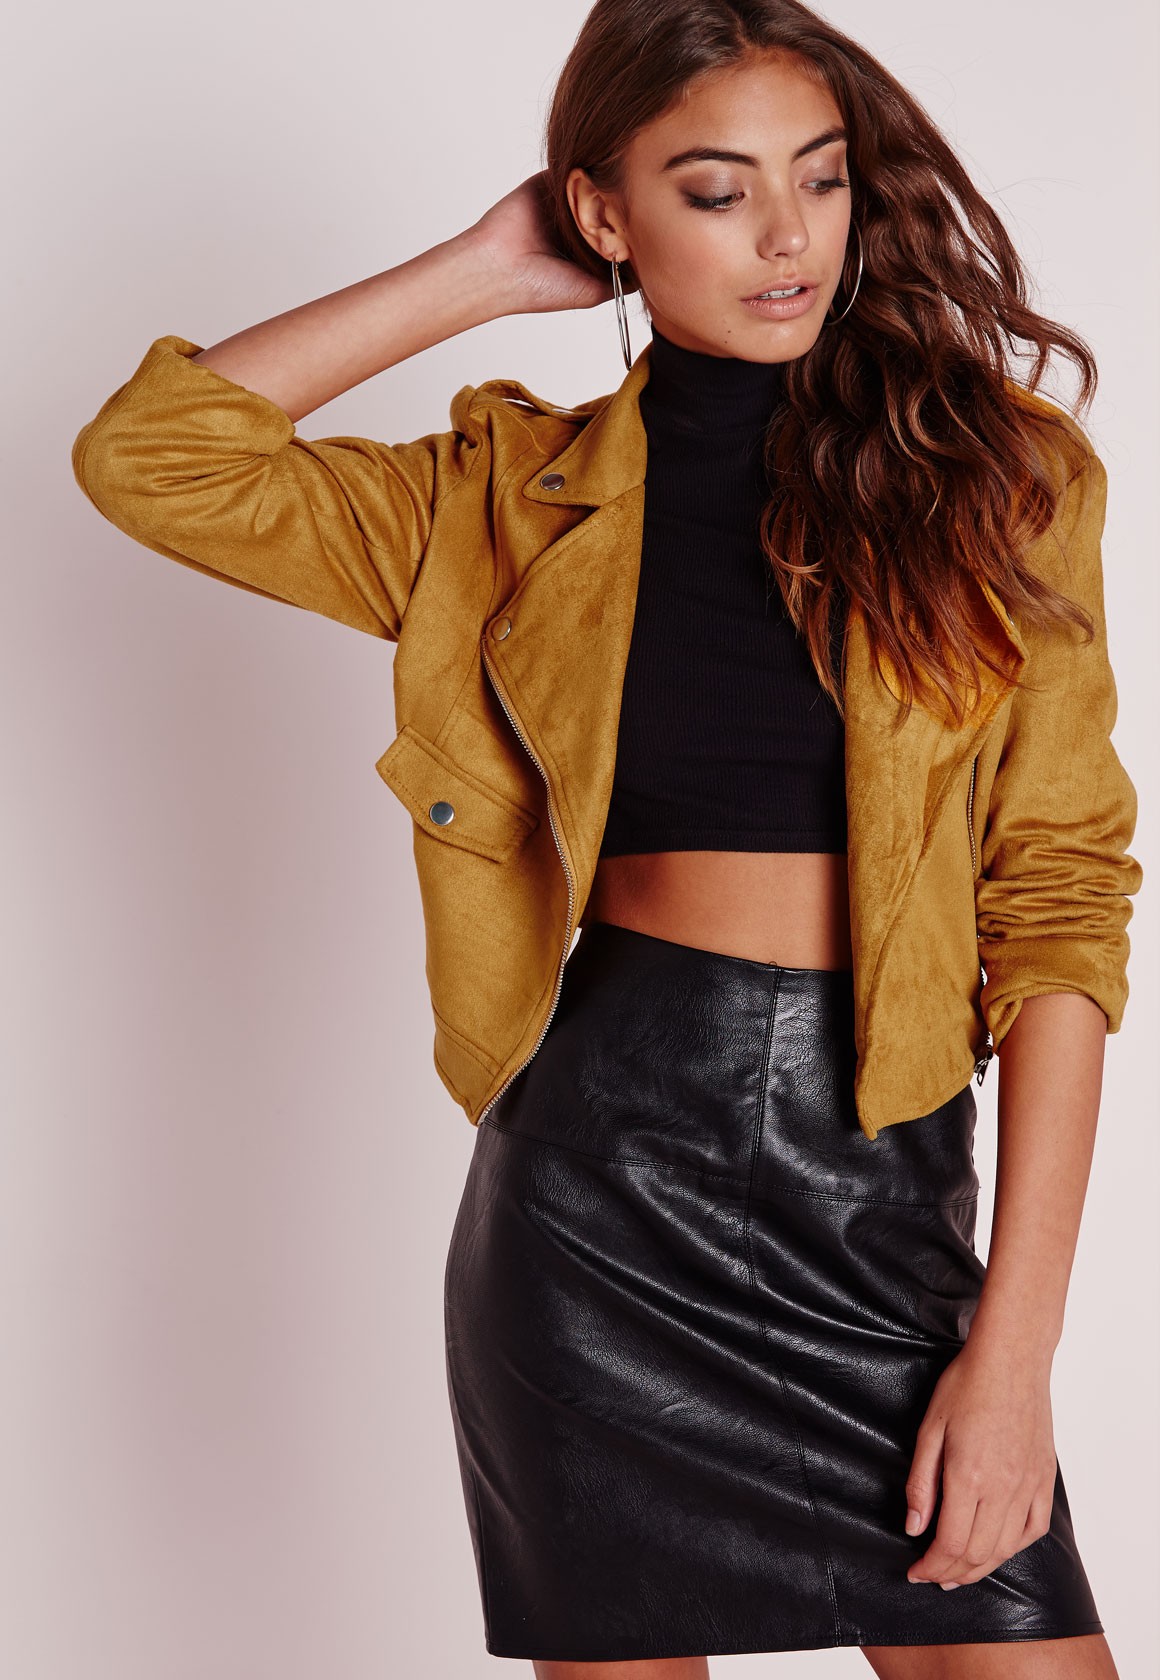 Vanessa Moe photoshoot for Missguided